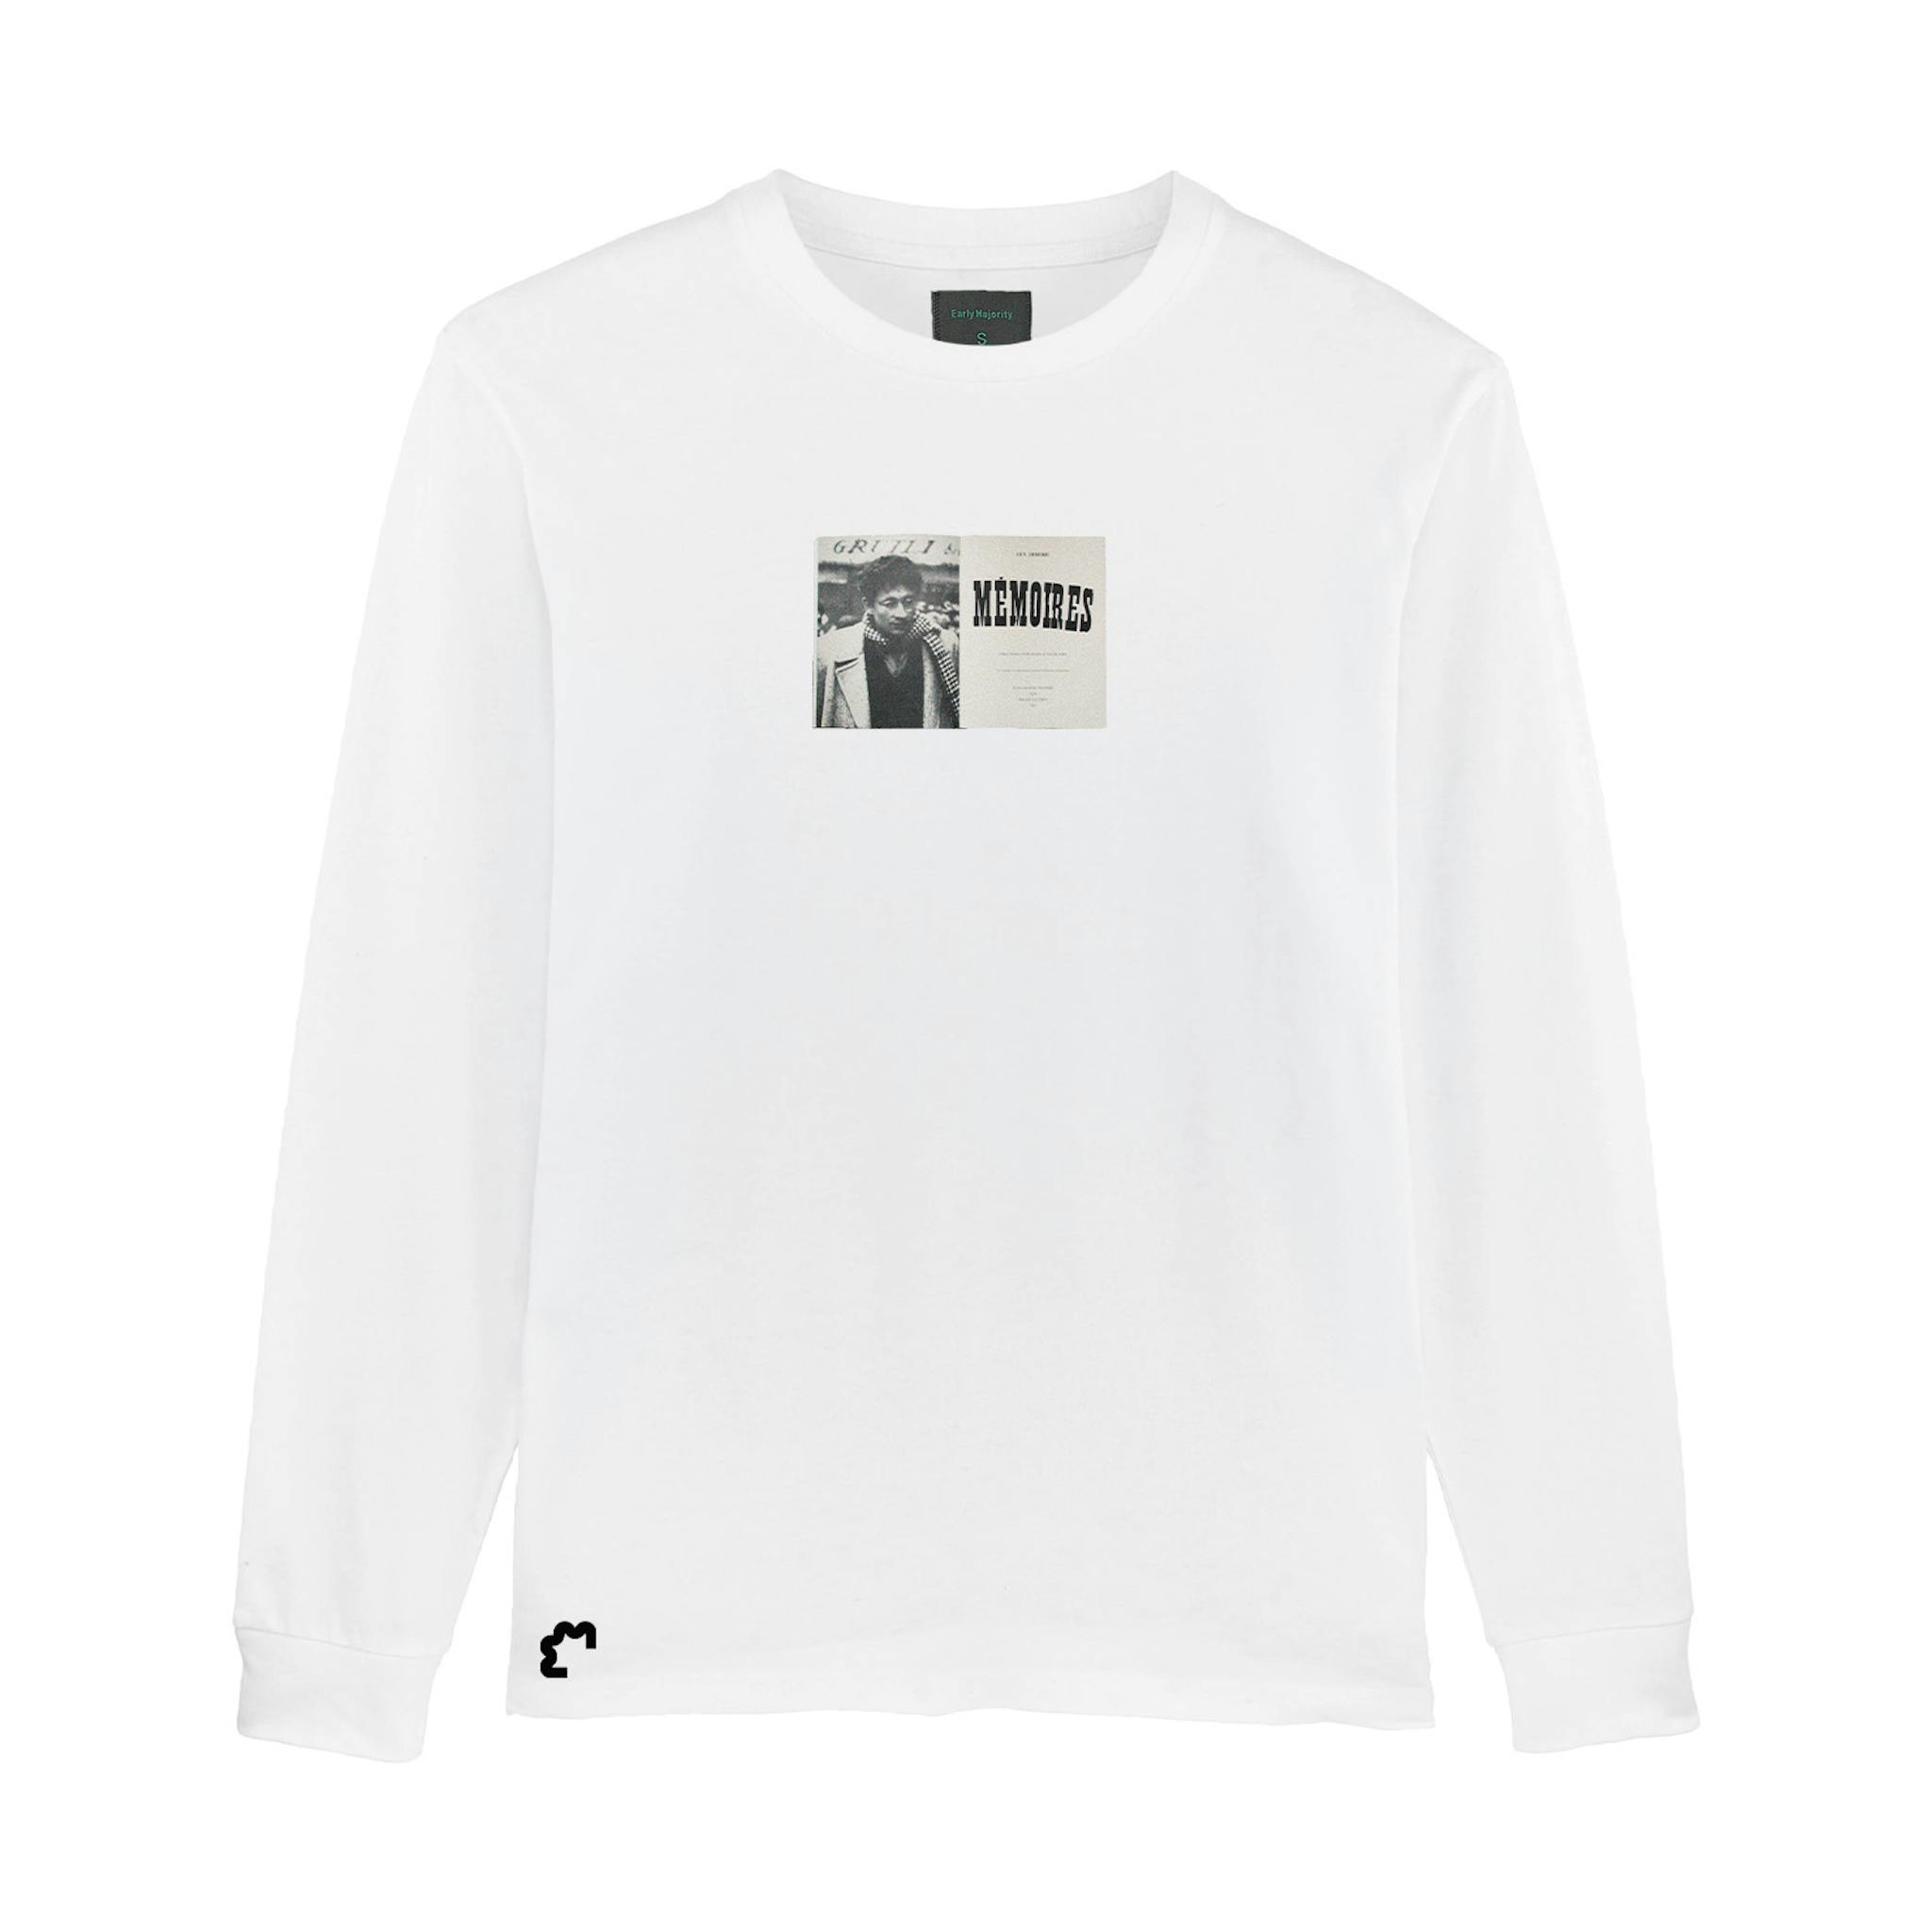 A white long-sleeve T-shirt featuring a square graphic with text and an photographic image.